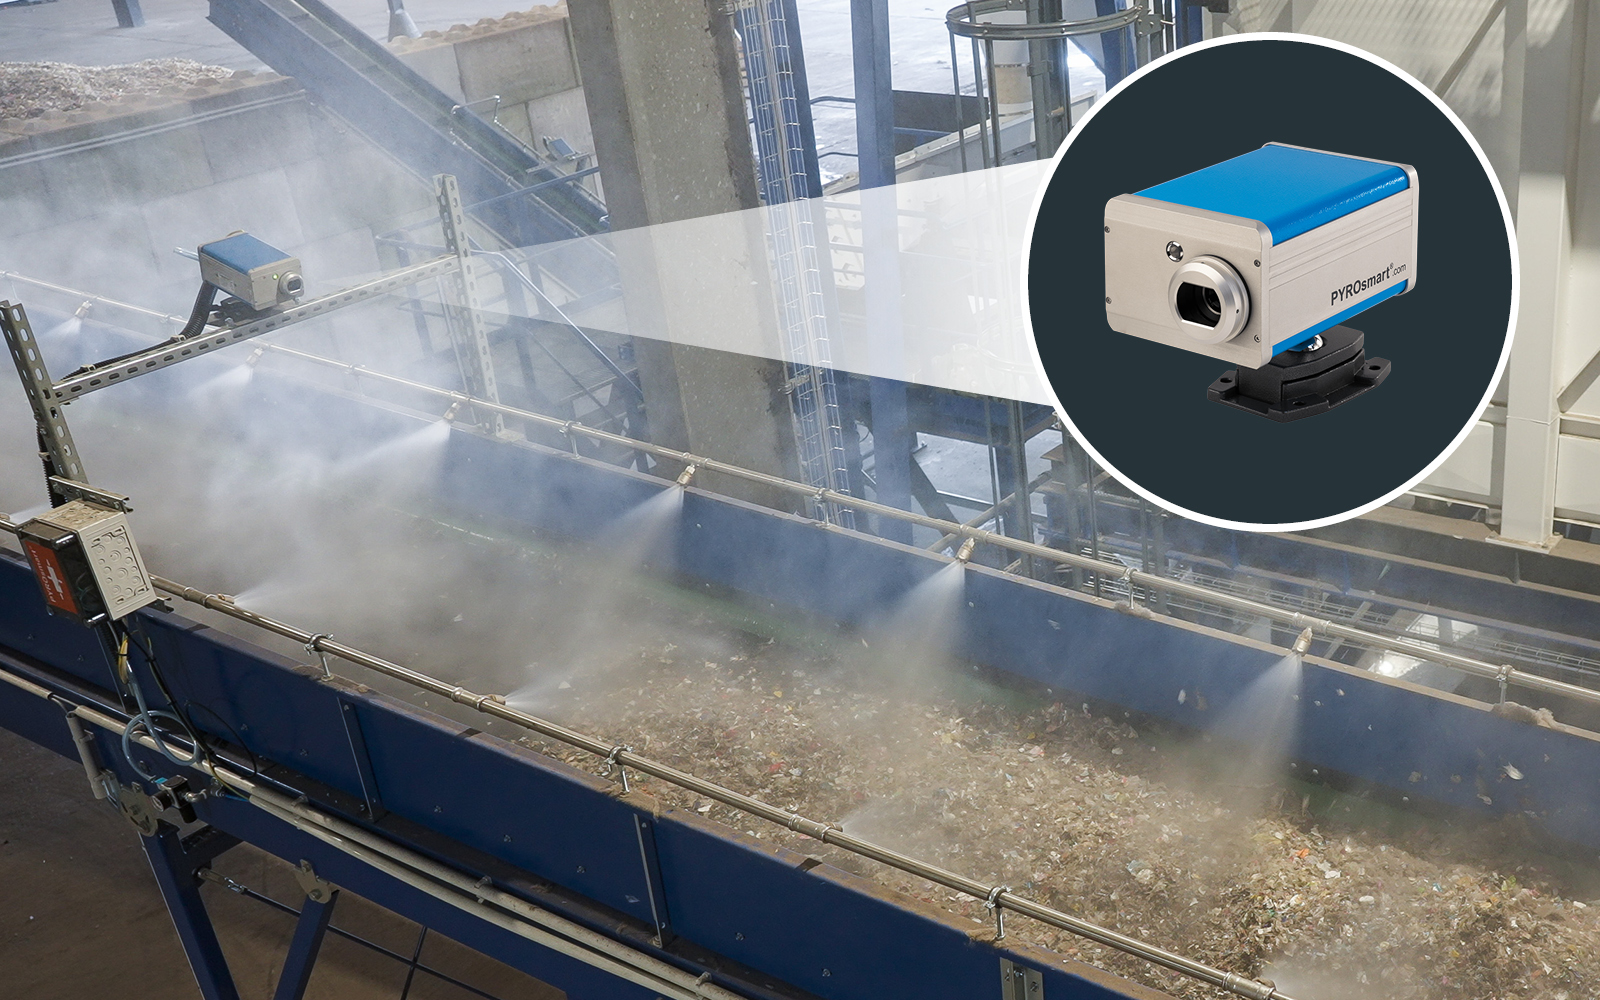 PYROsmart® one monitors belt transfer points and triggers extinguishing using water mist nozzles